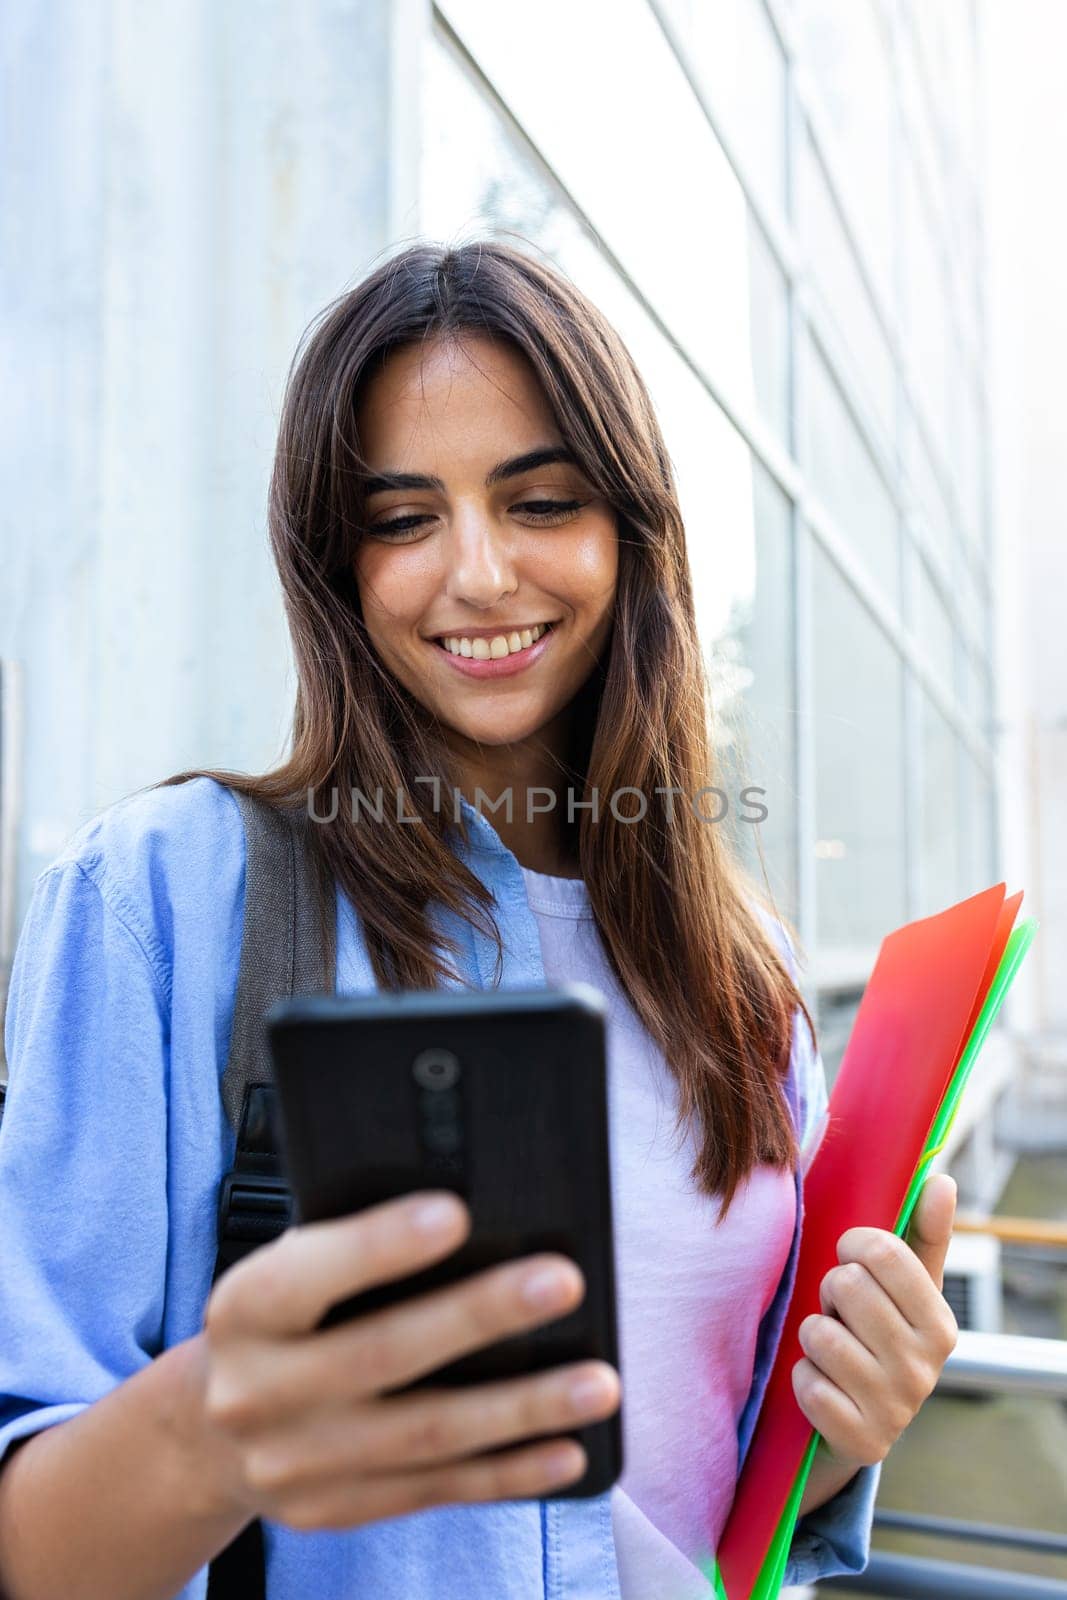 Front view of happy young brunette female university student using smart phone standing outside university building. Vertical image. Education concept.